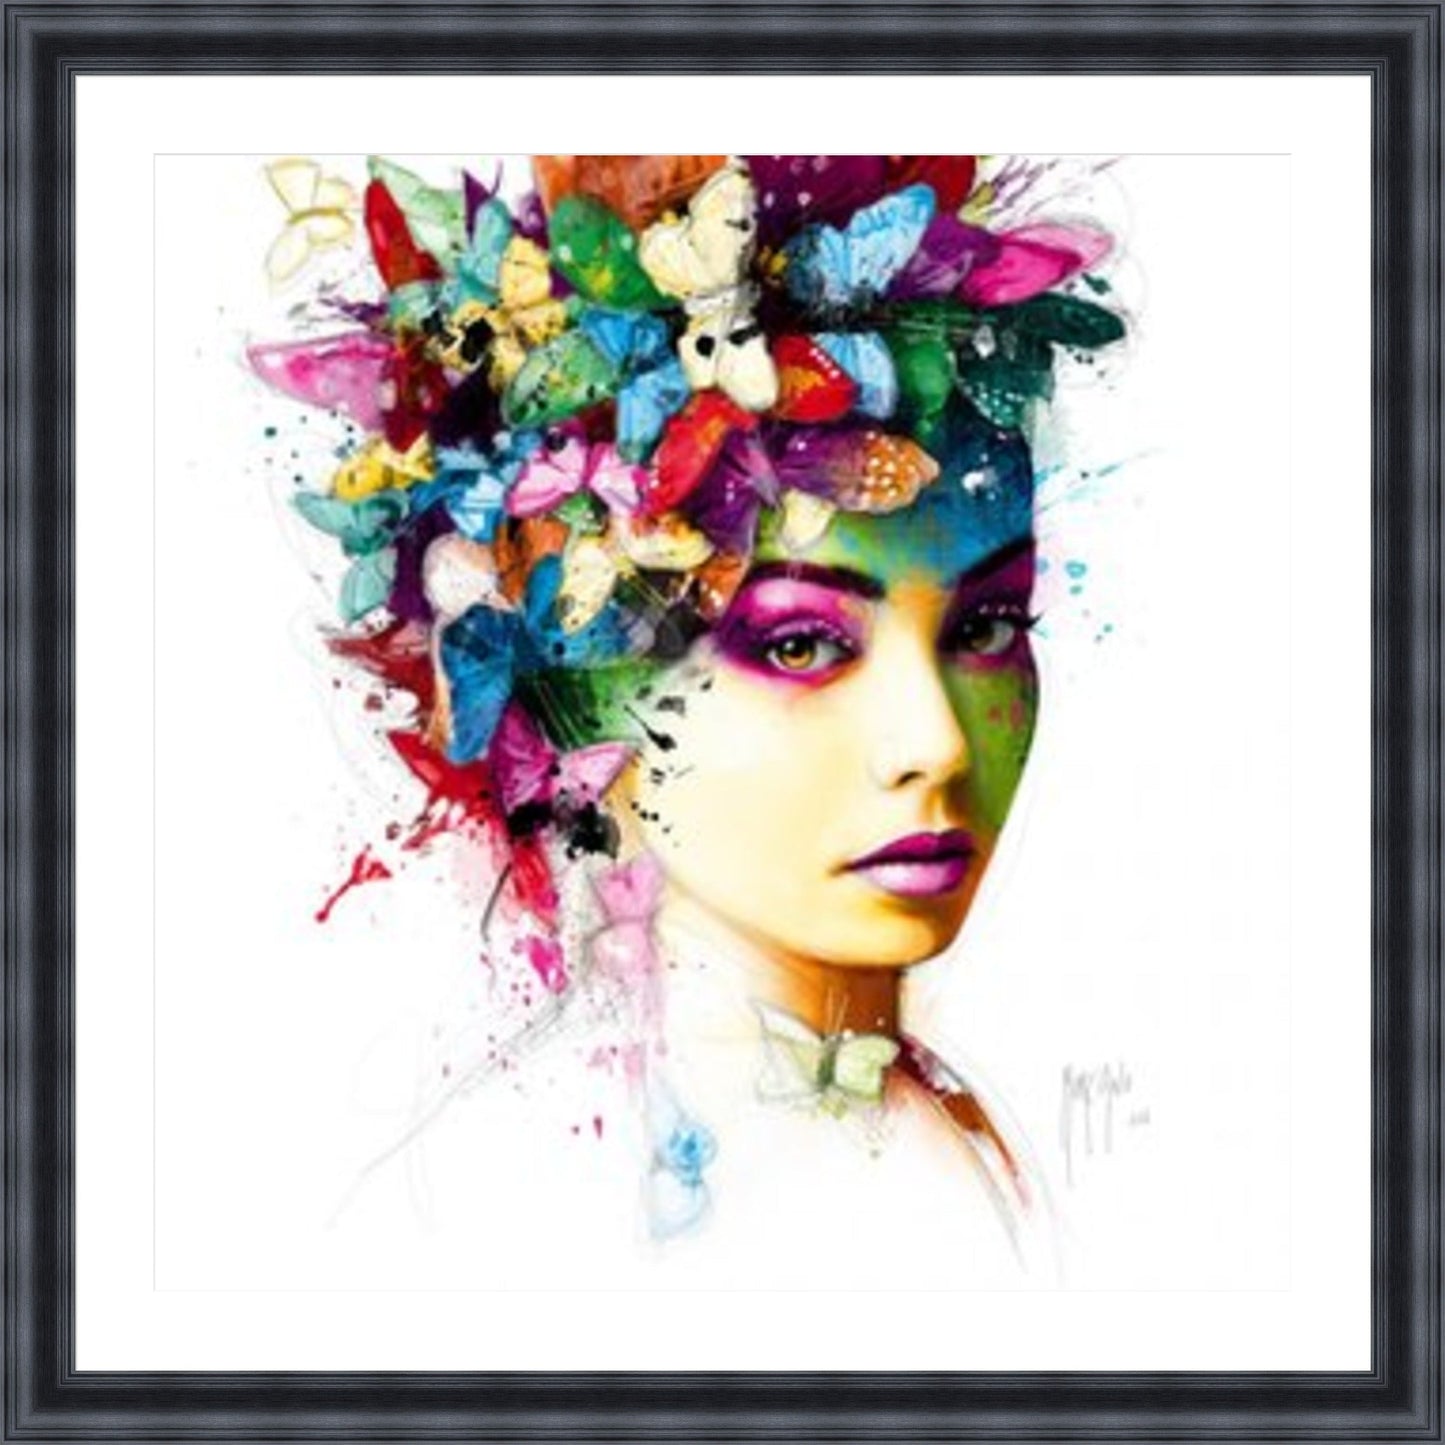 L'Effet Papillion by Patrice Murciano